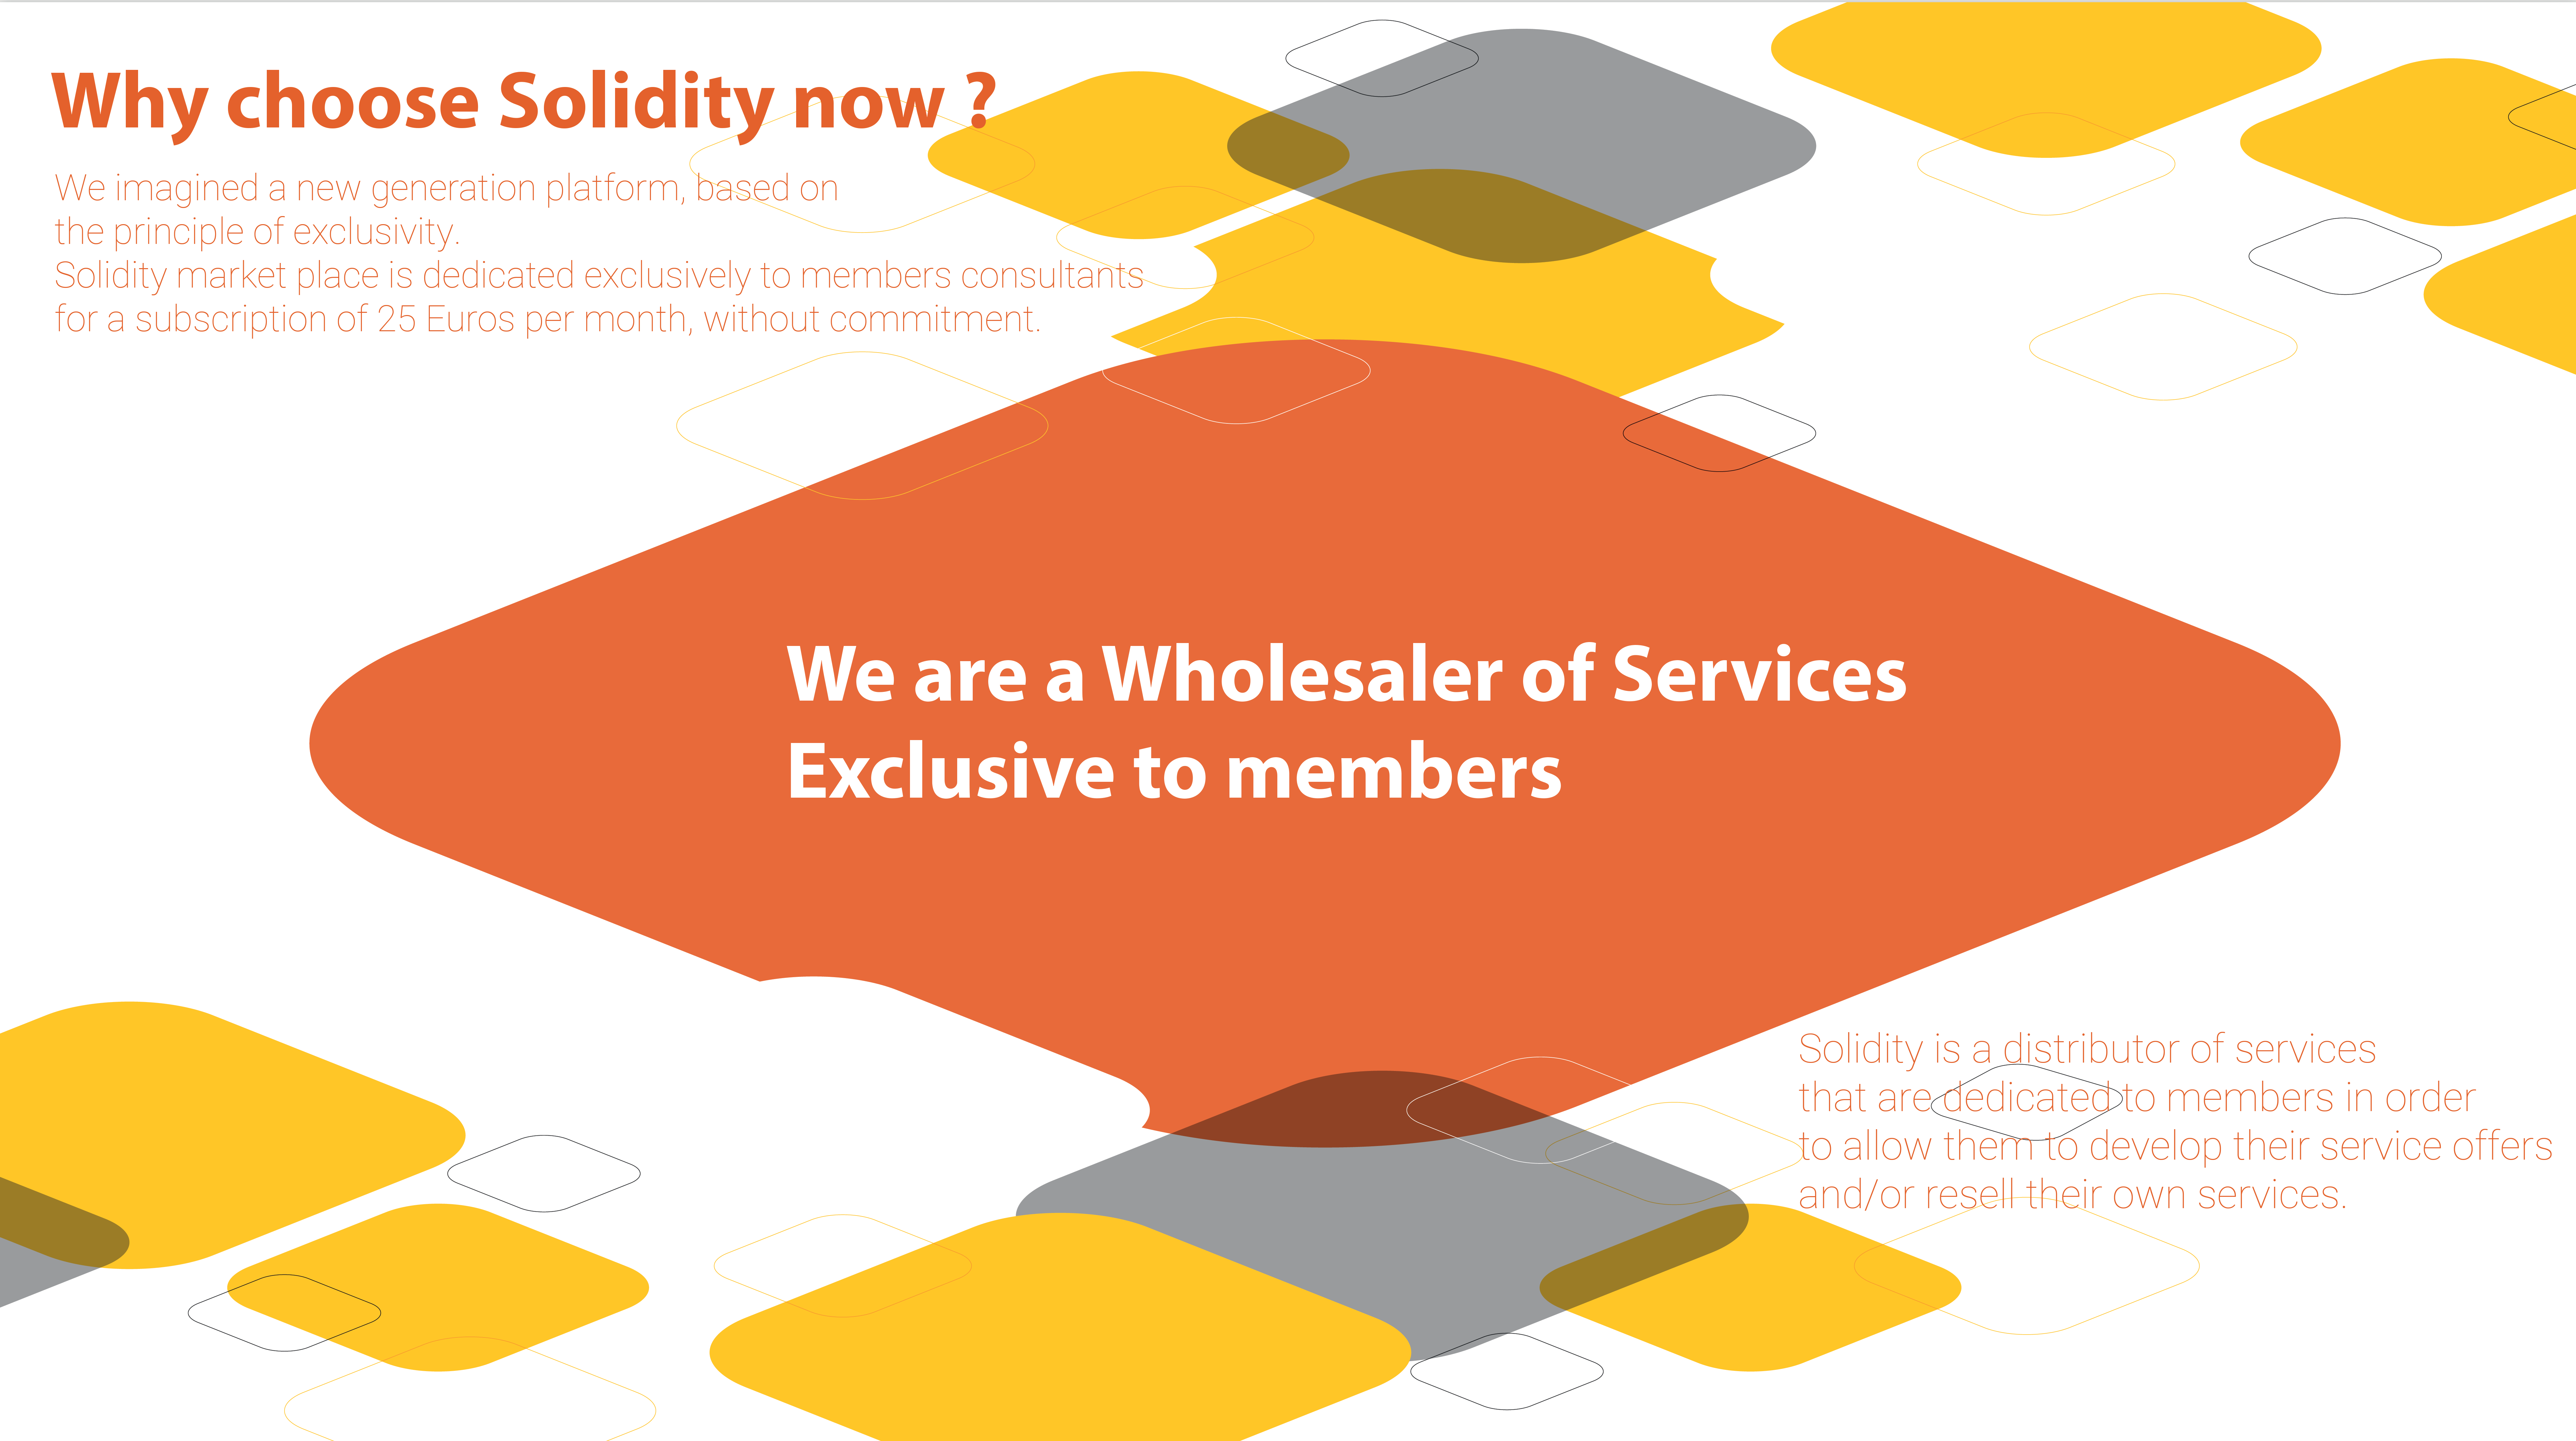 We are a Wholesaler of Services Exclusive to members
